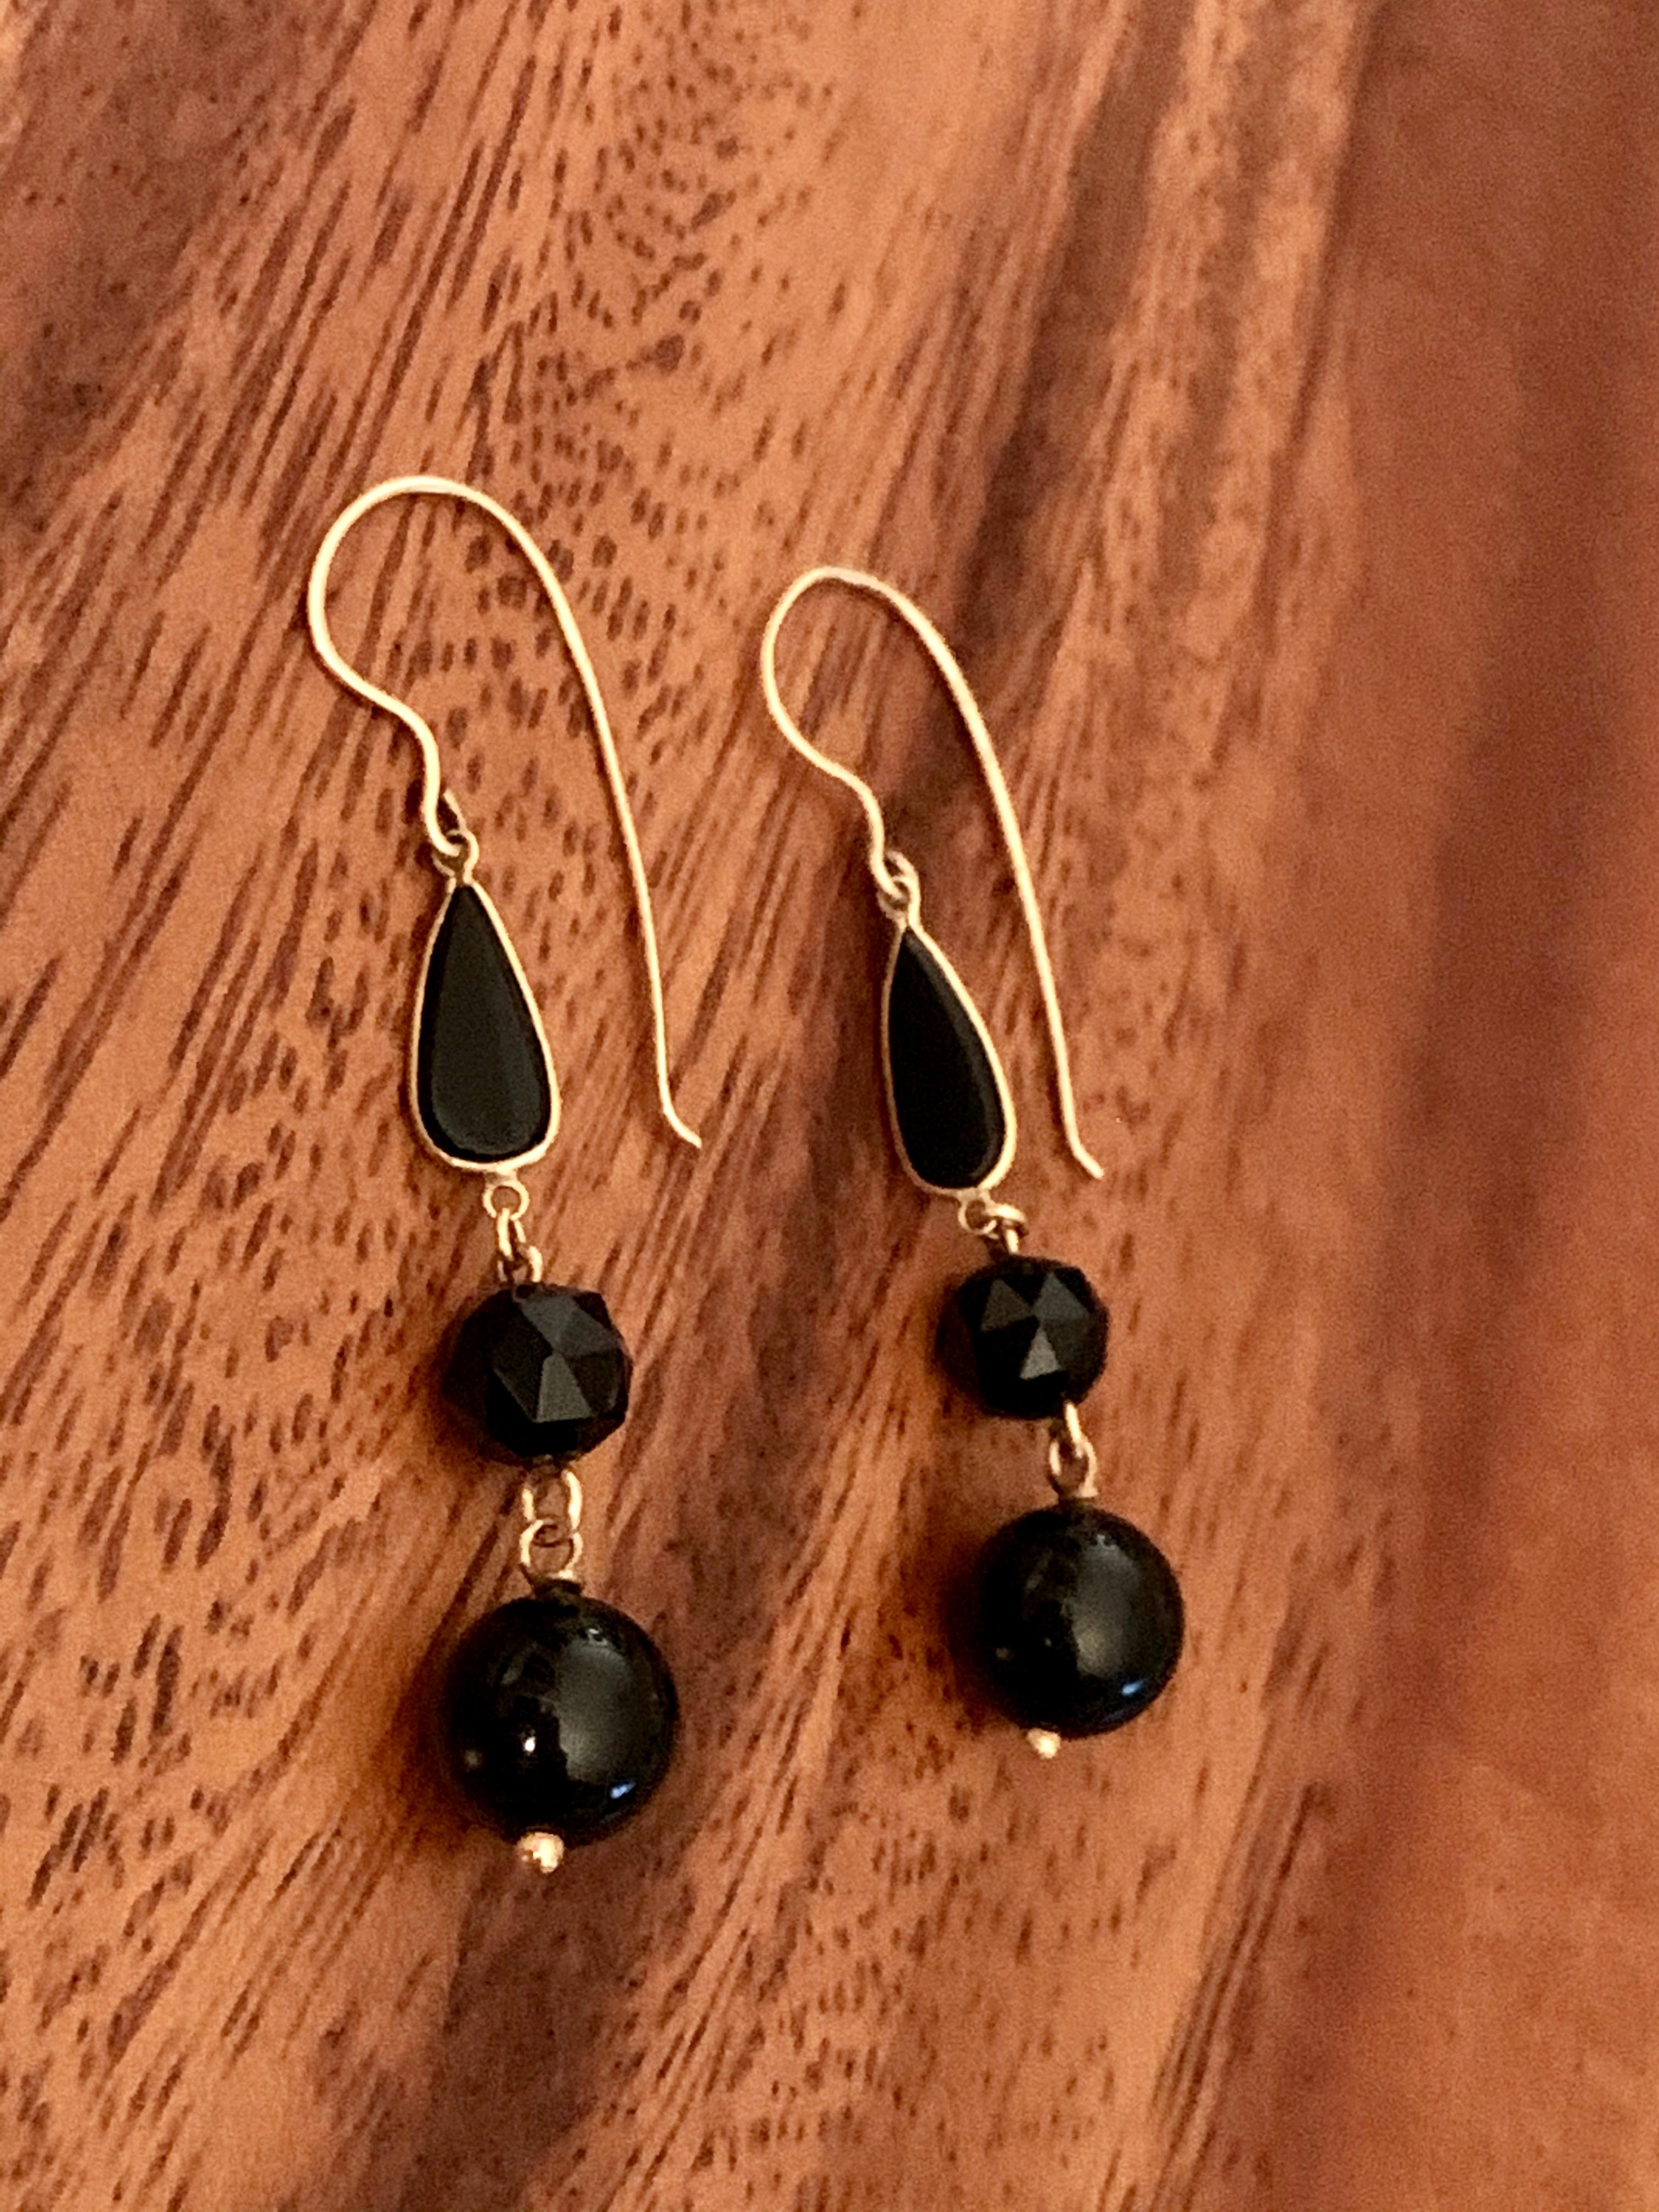 These 1950-1960's era vintage earrings feature three black Onyx stones in each earring.  One is a faceted bead, one is smooth and one is teardrop-shaped with a 14 karat Gold frame. The ear wires and findings are all 14 karat Gold as well.  
Length: